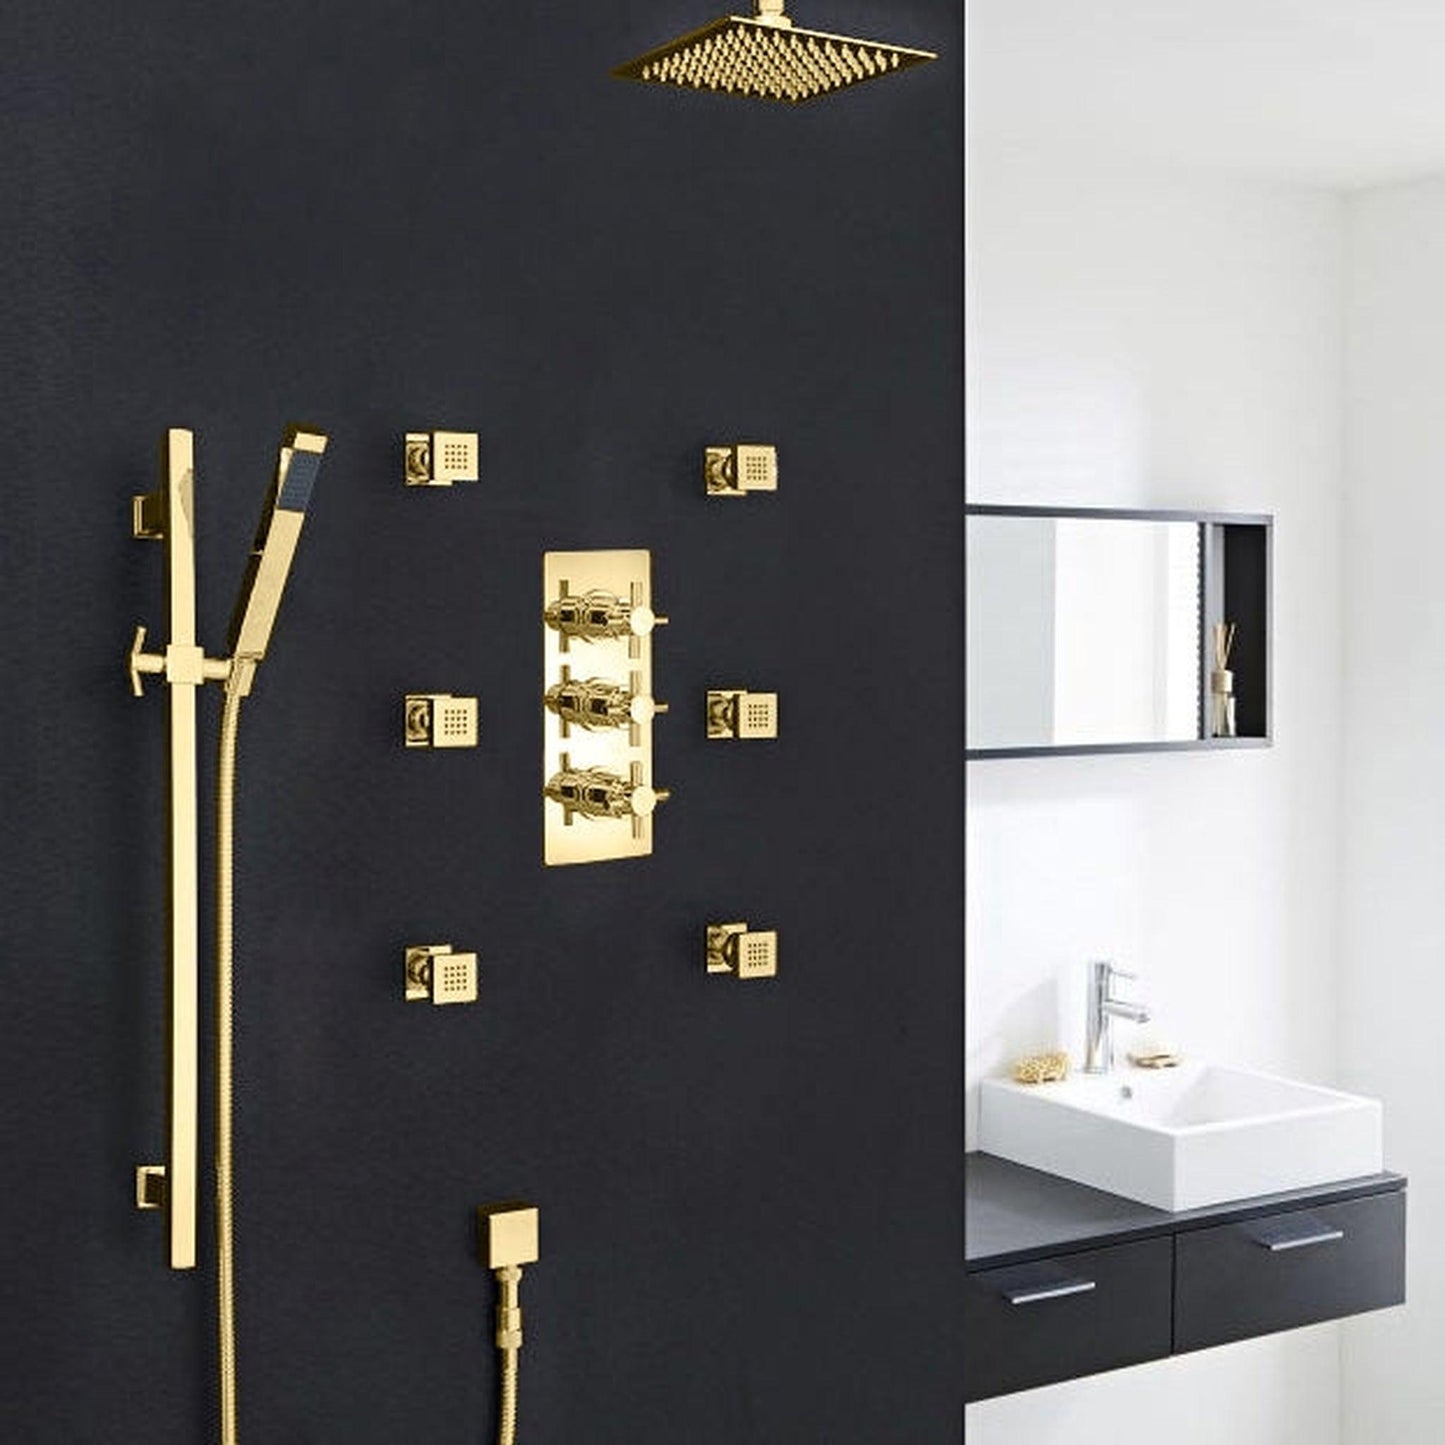 Fontana Reno 16" Gold Round Ceiling Mounted Rainfall Shower System With 6-Body Massage Jets and Hand Shower